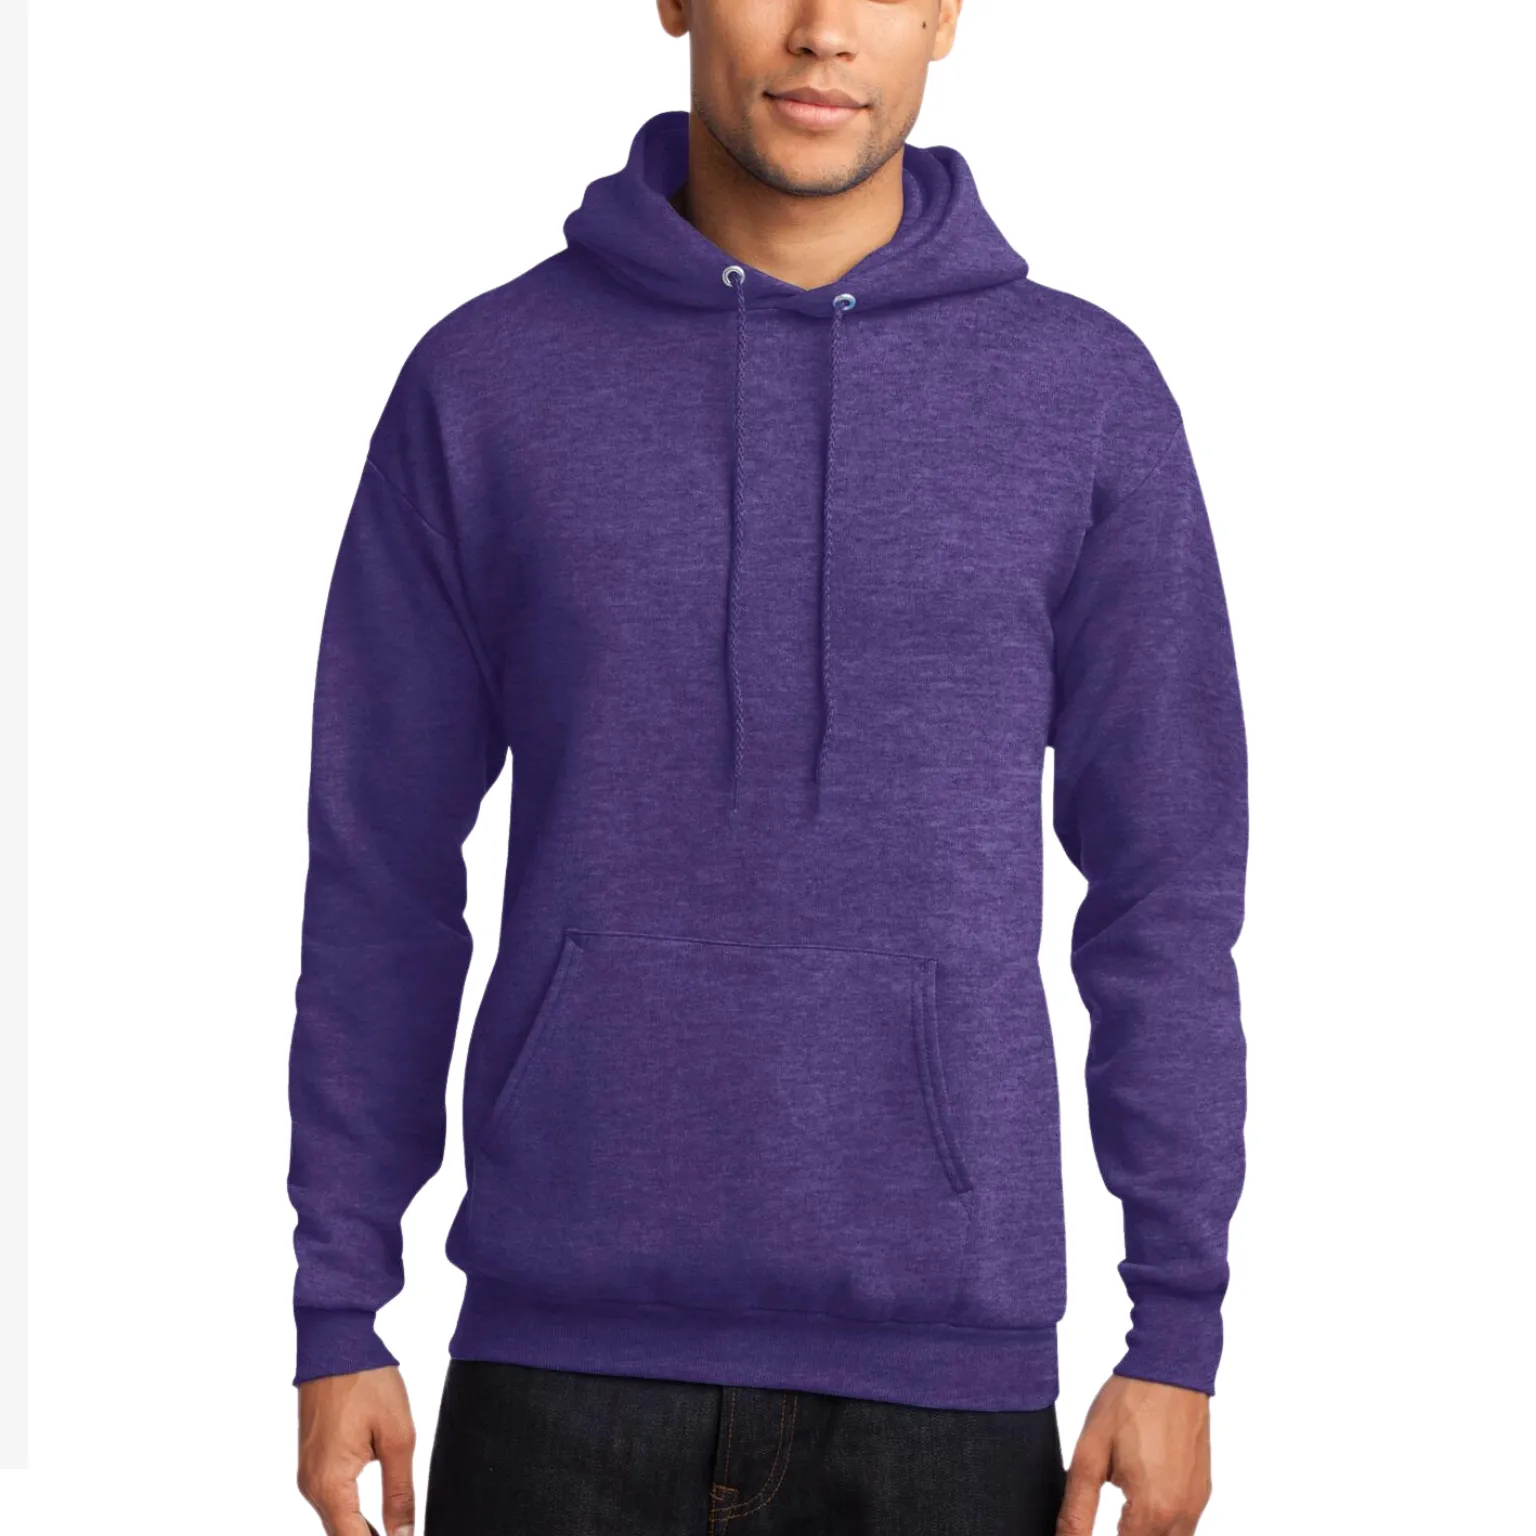 Wool Hoodie manufacturing with trendy design